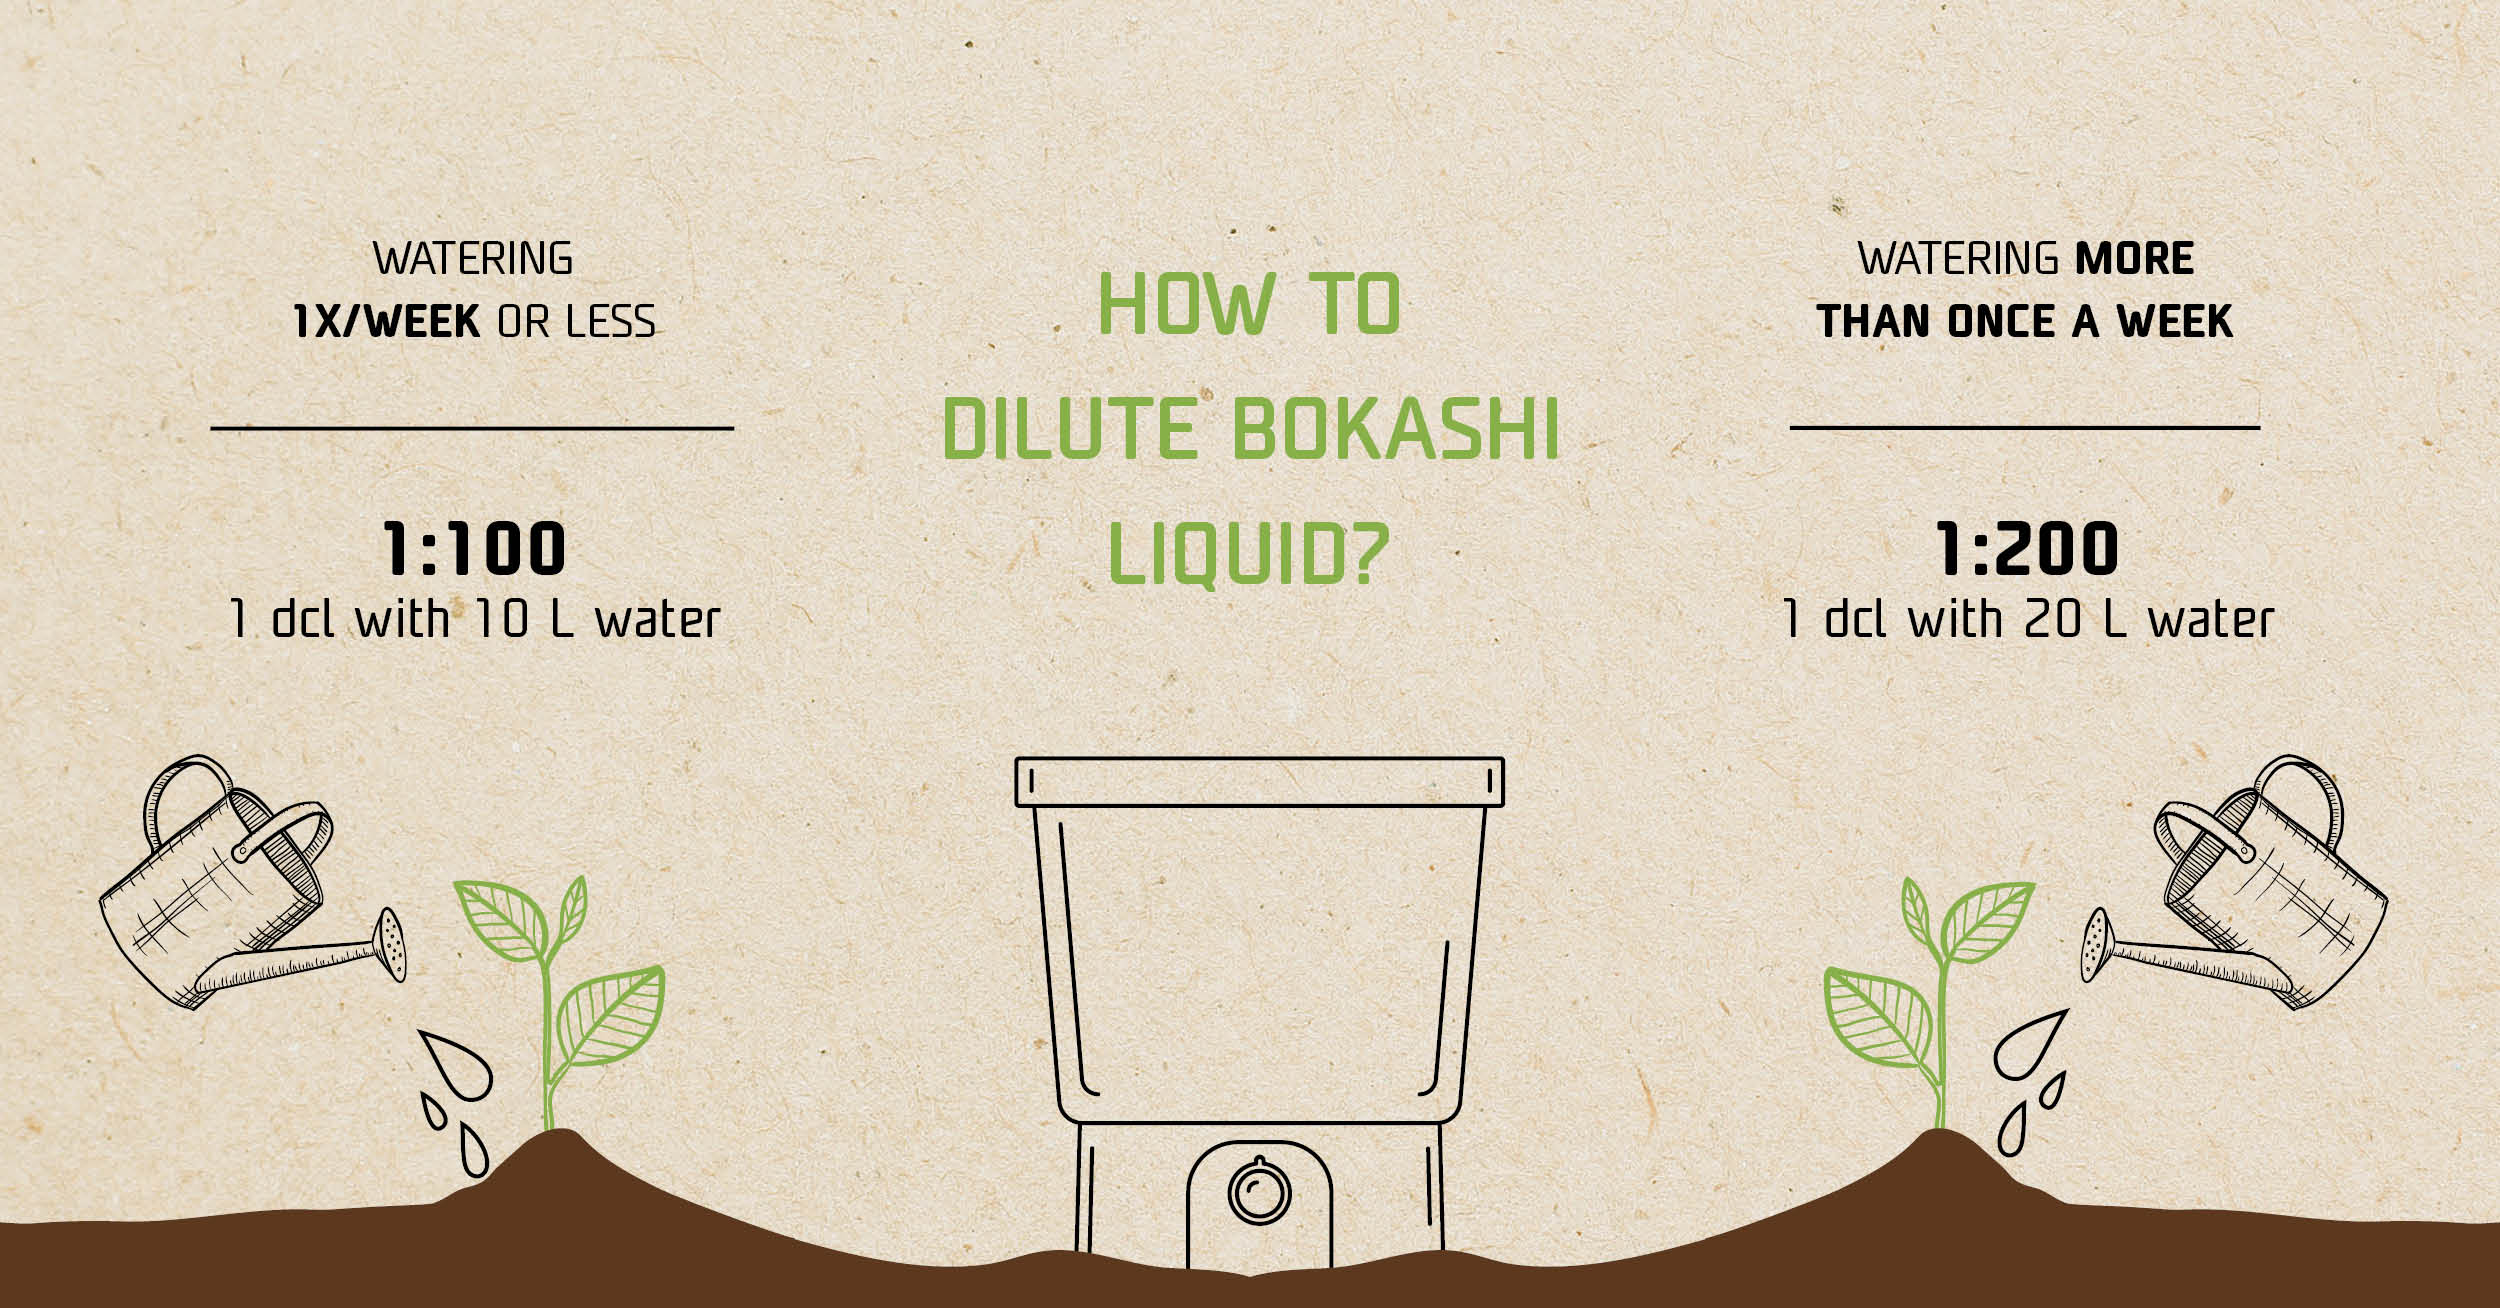 What is Bokashi liquid and how to use it? – Wiggly Wigglers